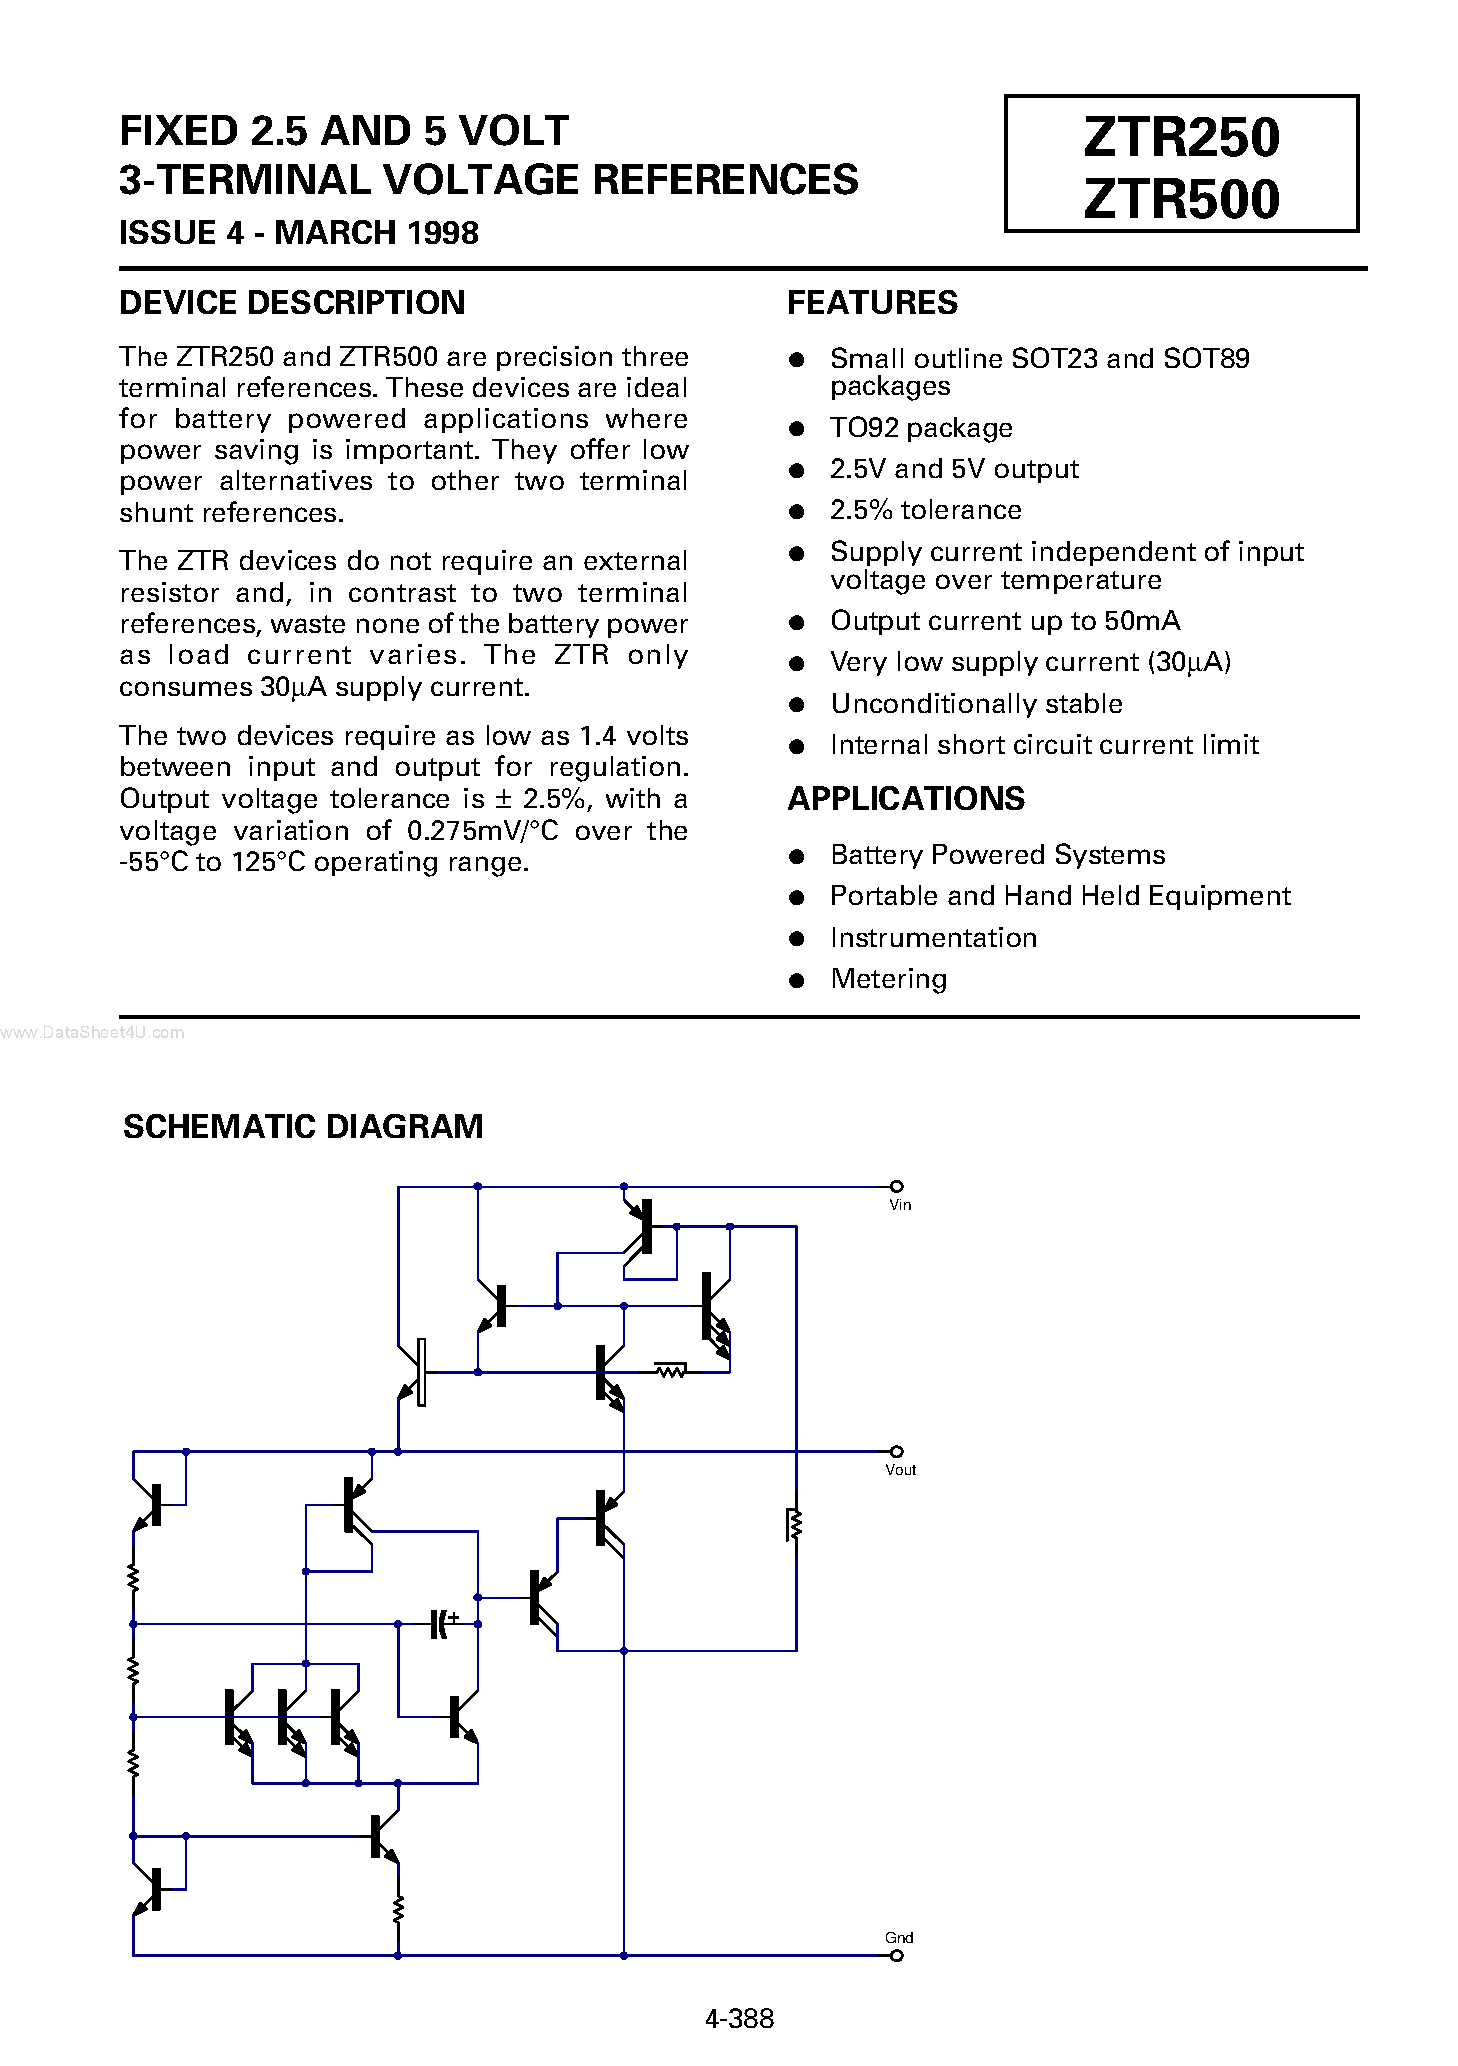 Datasheet ZTR250 - (ZTR250 / ZTR500) FIXED 2.5 AND 5 VOLT 3-TERMINAL VOLTAGE REFERENCES page 1